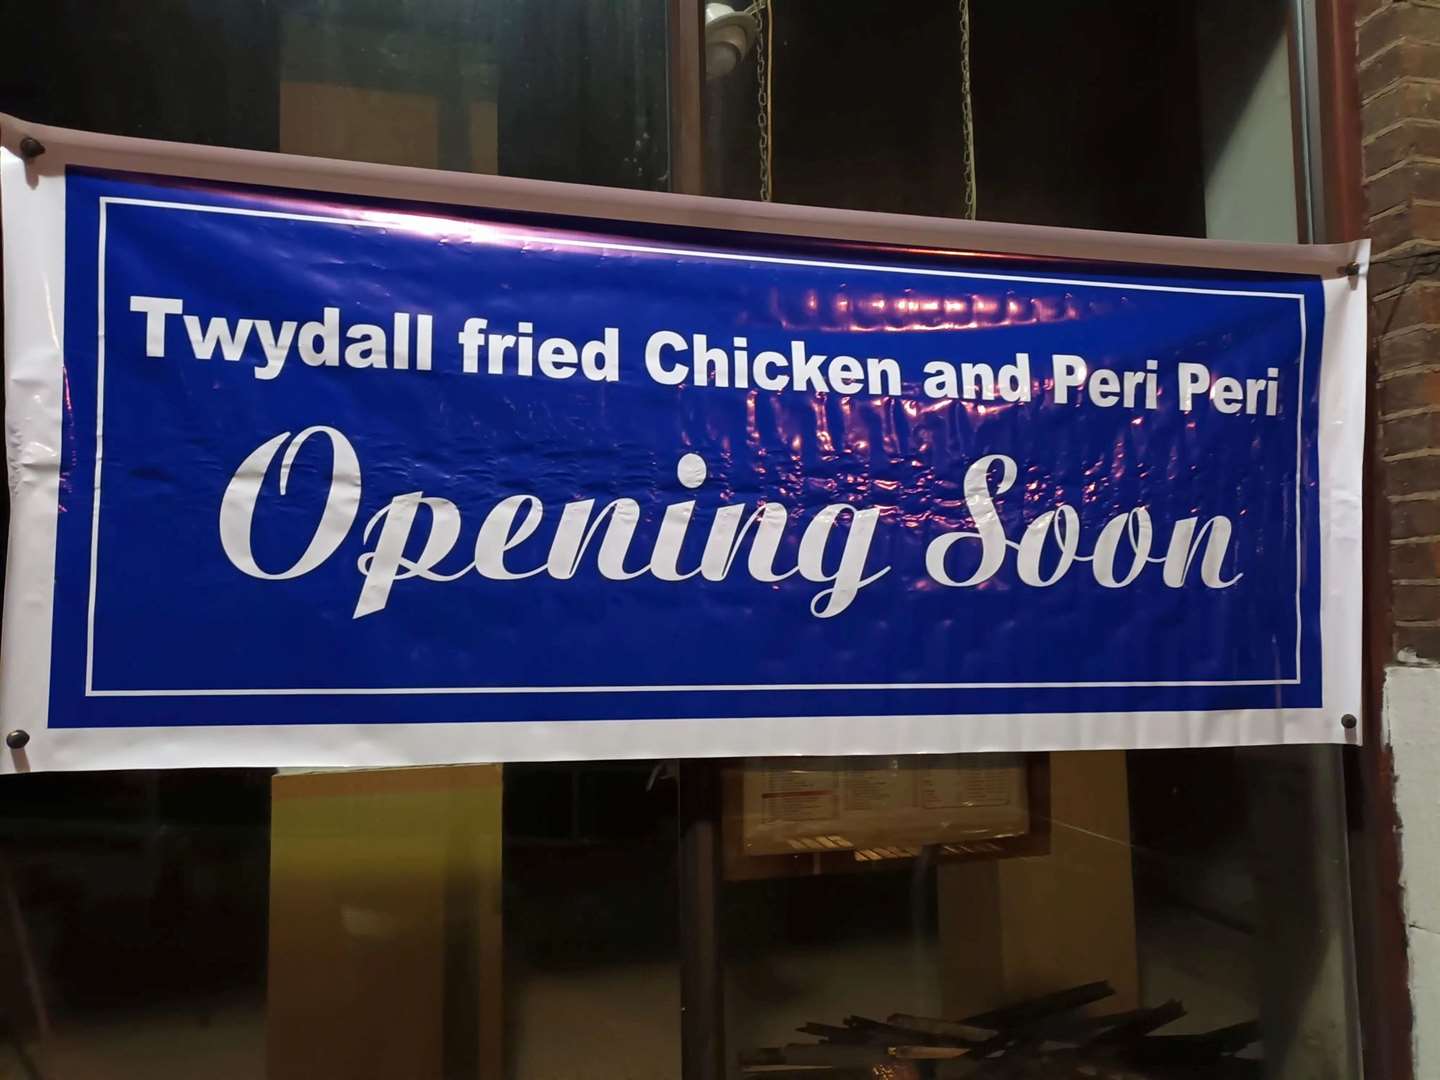 A new fried chicken shops looks set to open in Twydall Green, Gillingham. Picture: Lyn Harden